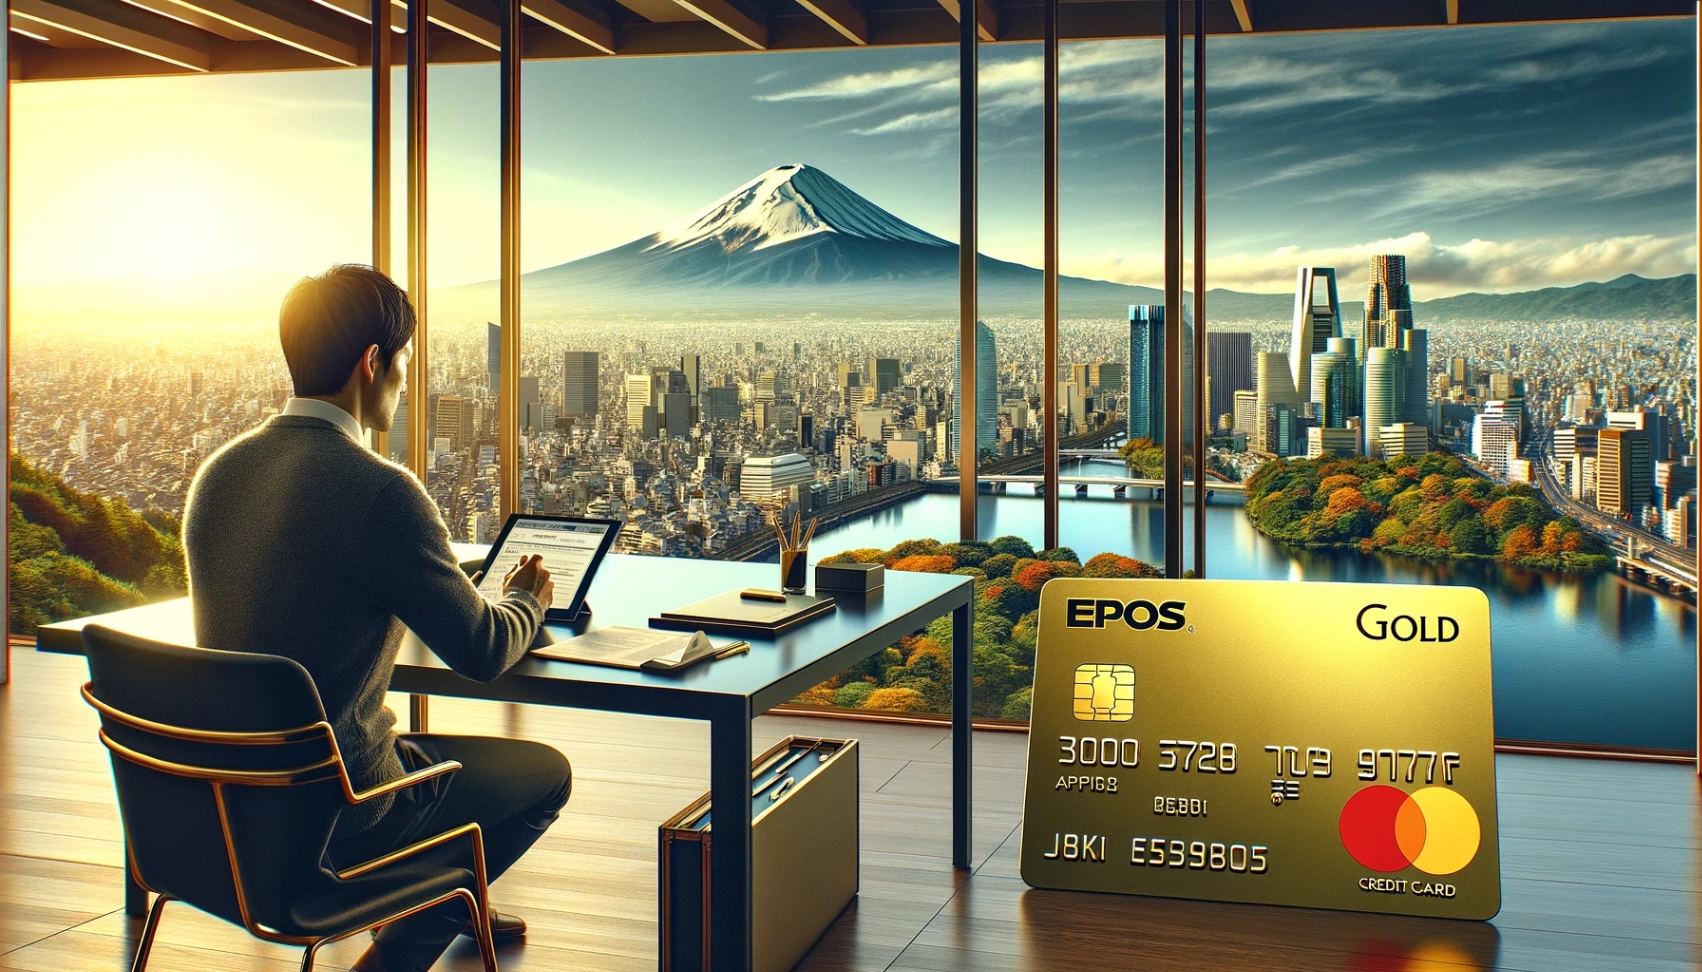 Epos Gold Credit Card - How to Apply